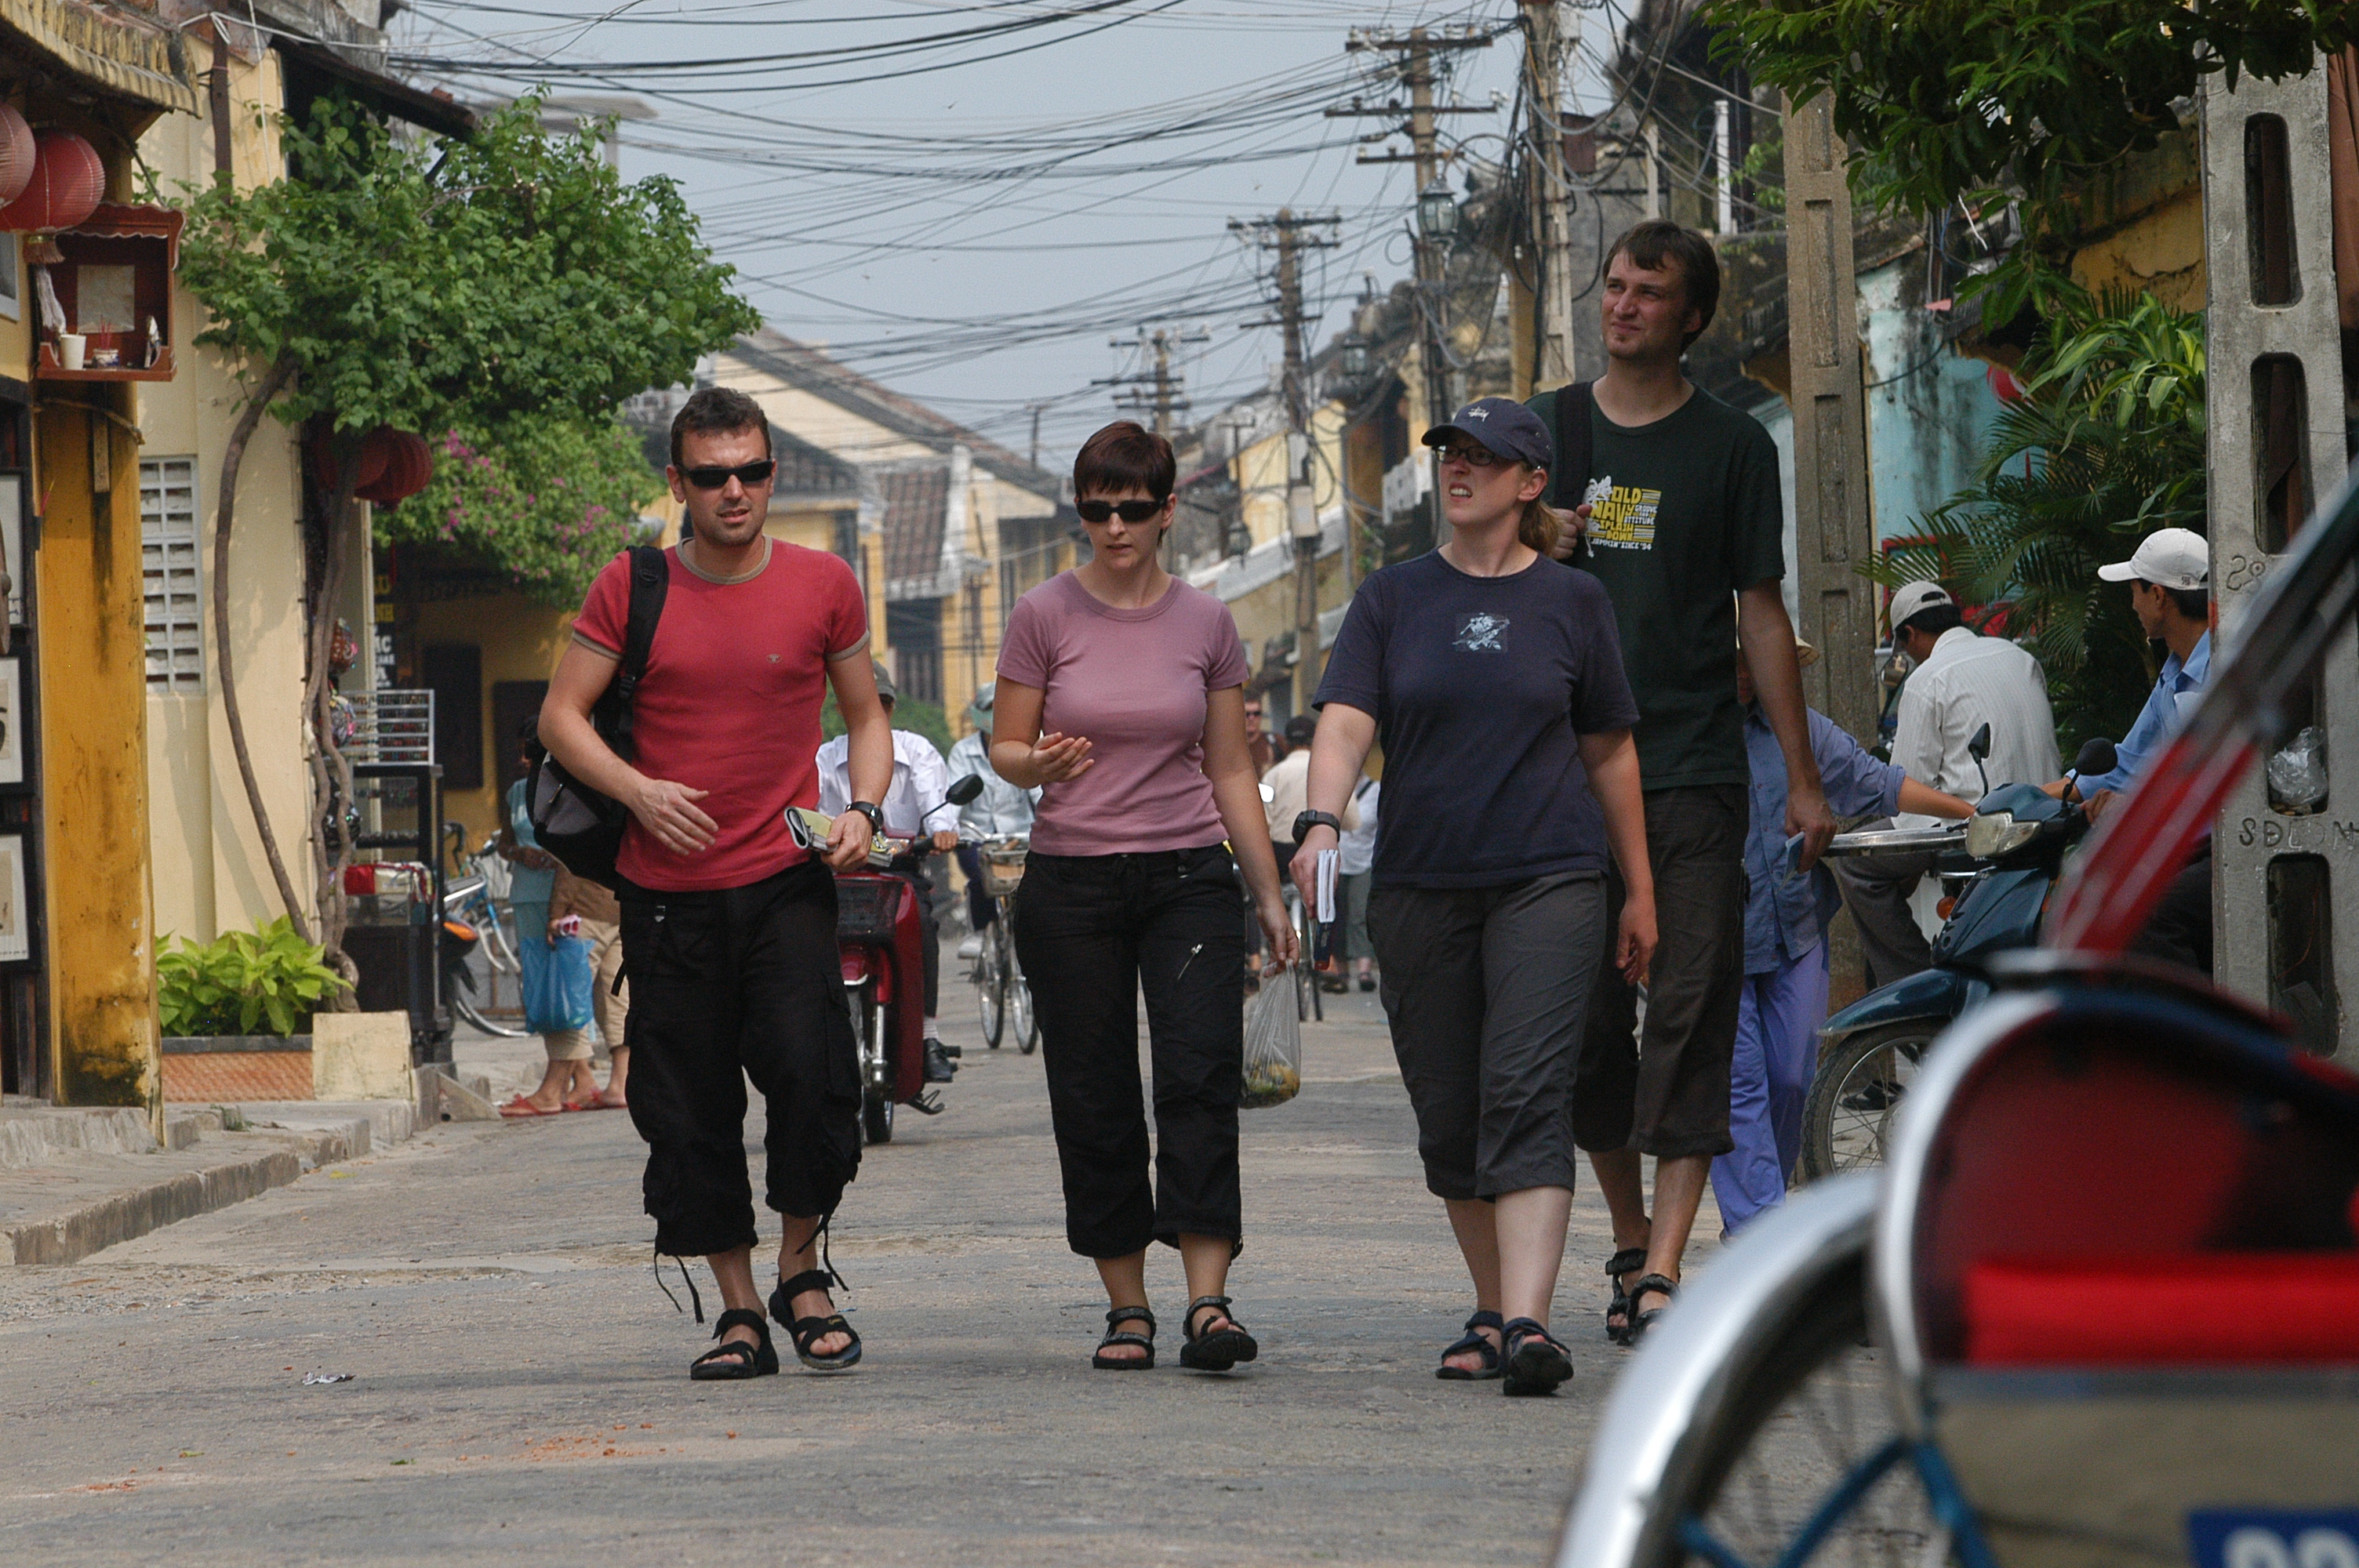 Entrance fees in Vietnam’s Hoi An town for repair work: official